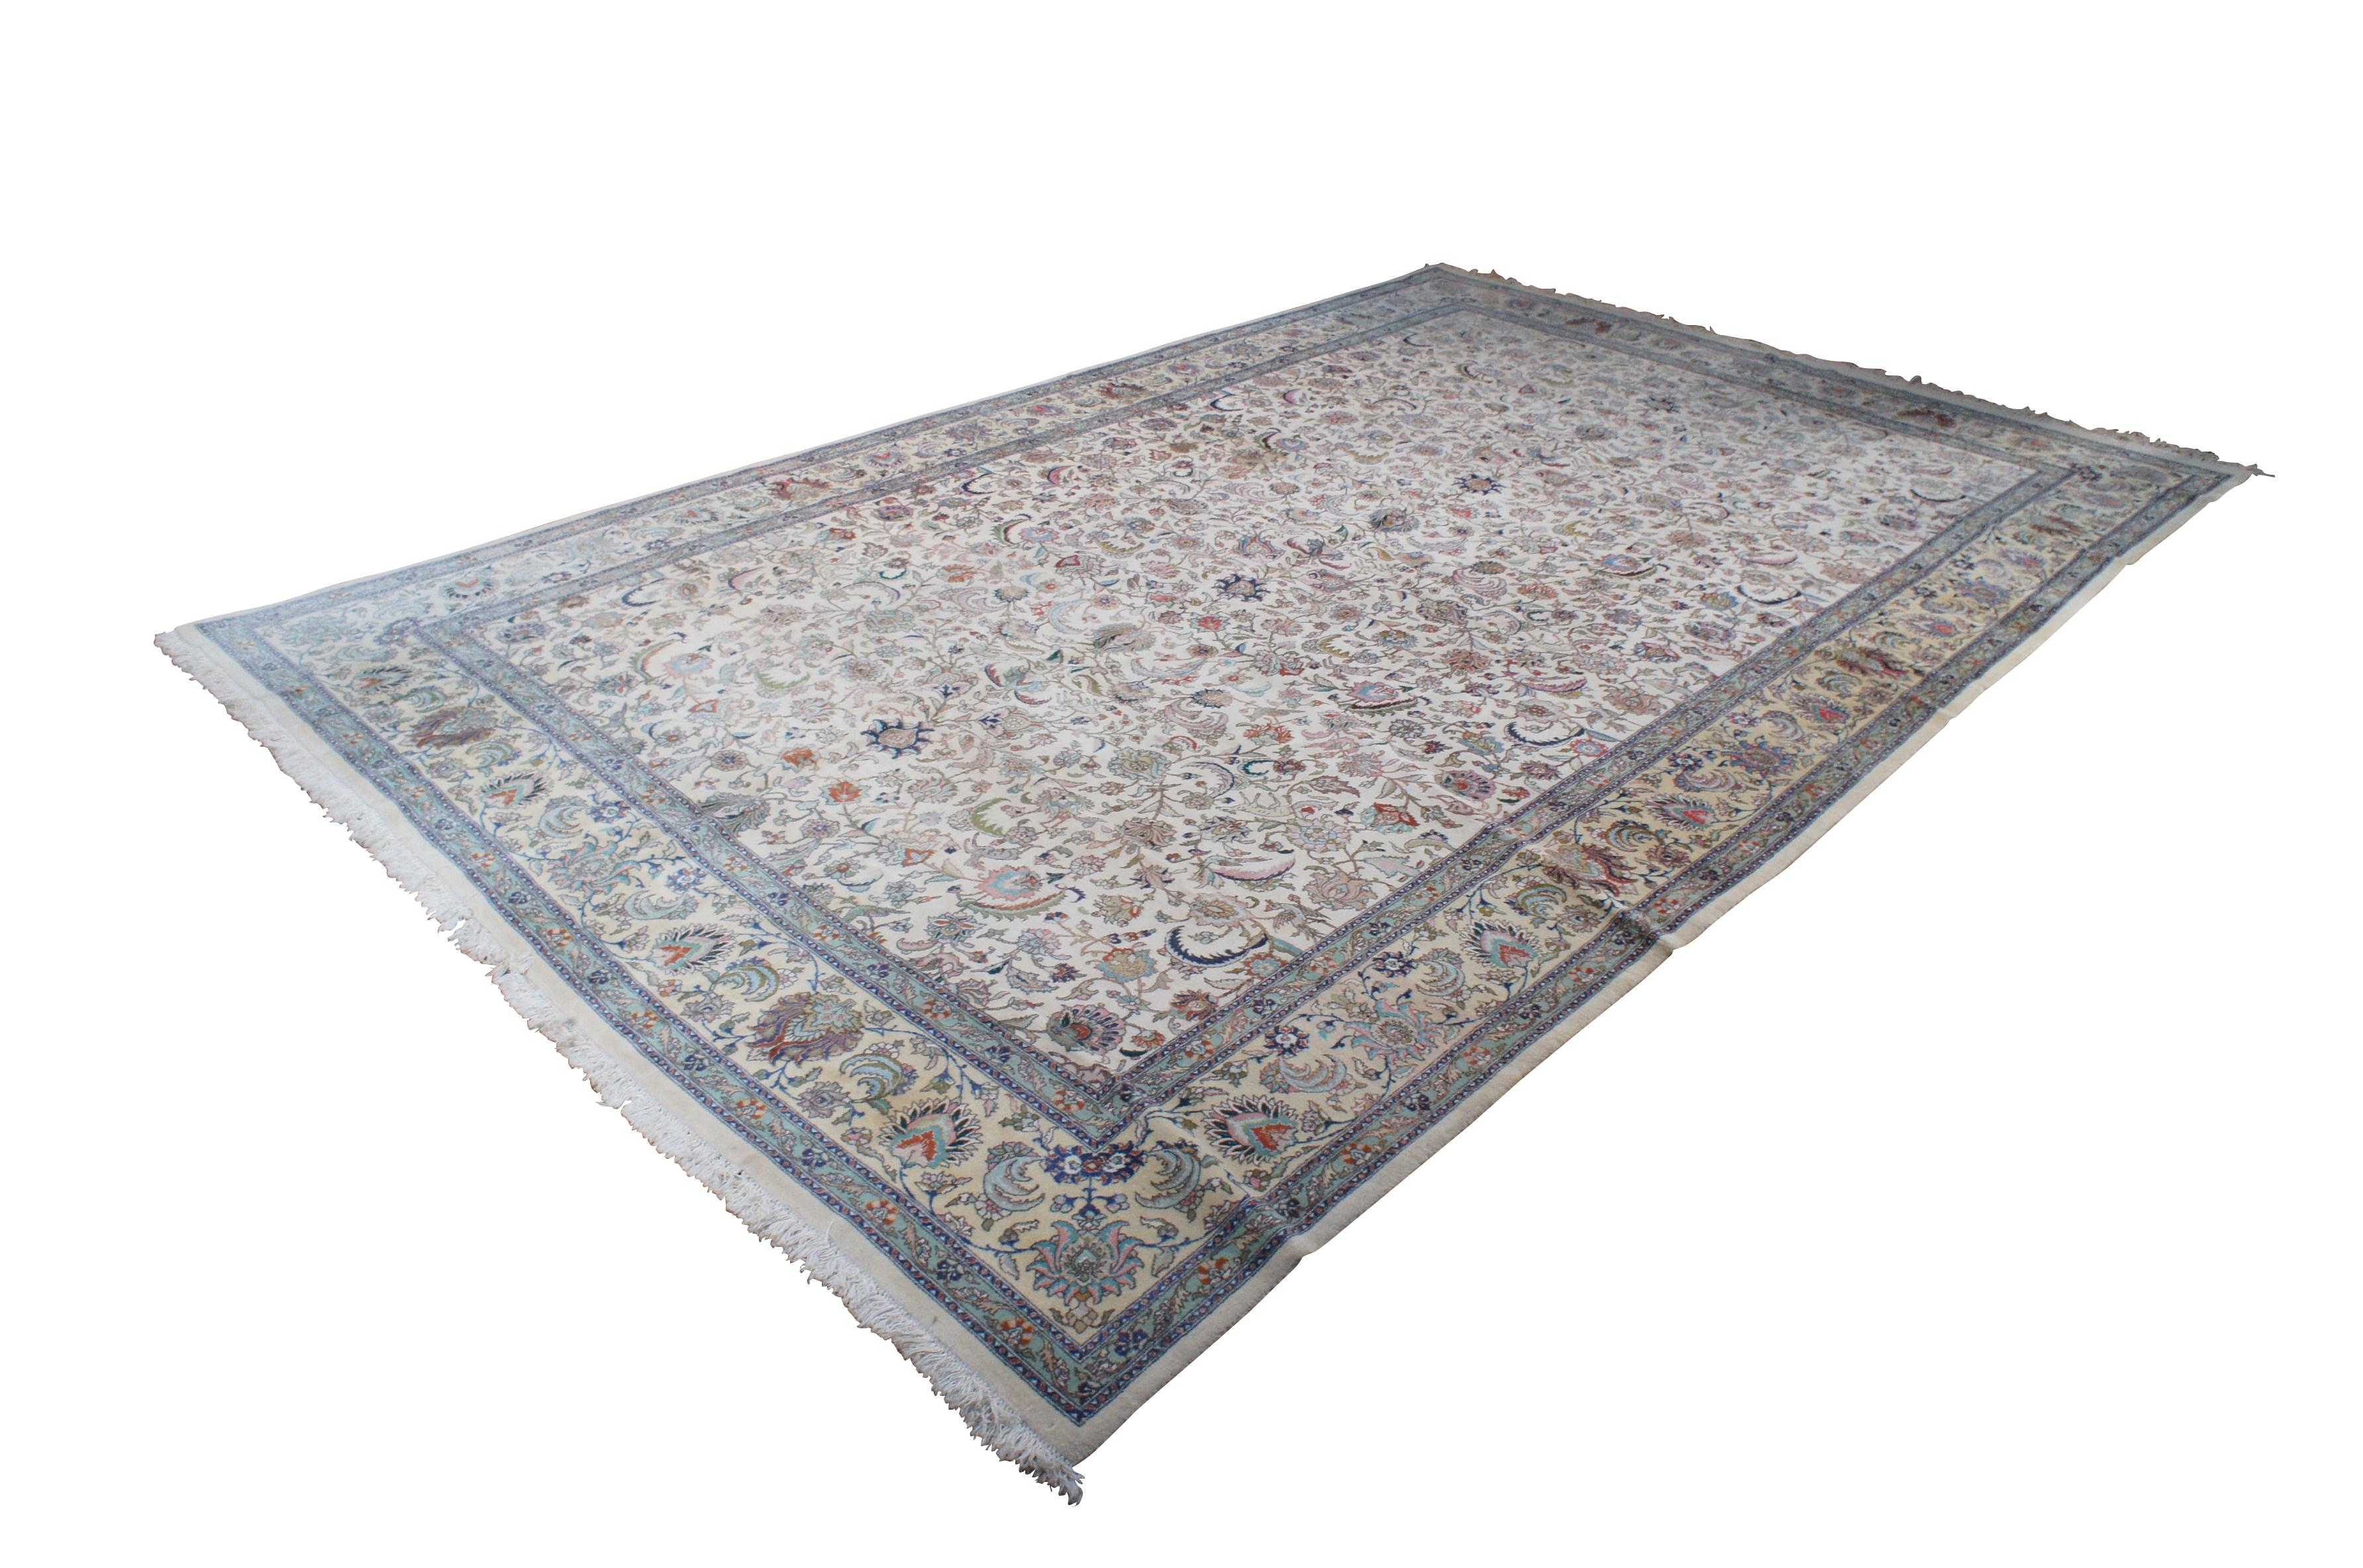 Hand-Knotted Monumental Persian Tabriz Wool Animal Bird Design Area Rug Carpet 12' x 19' For Sale